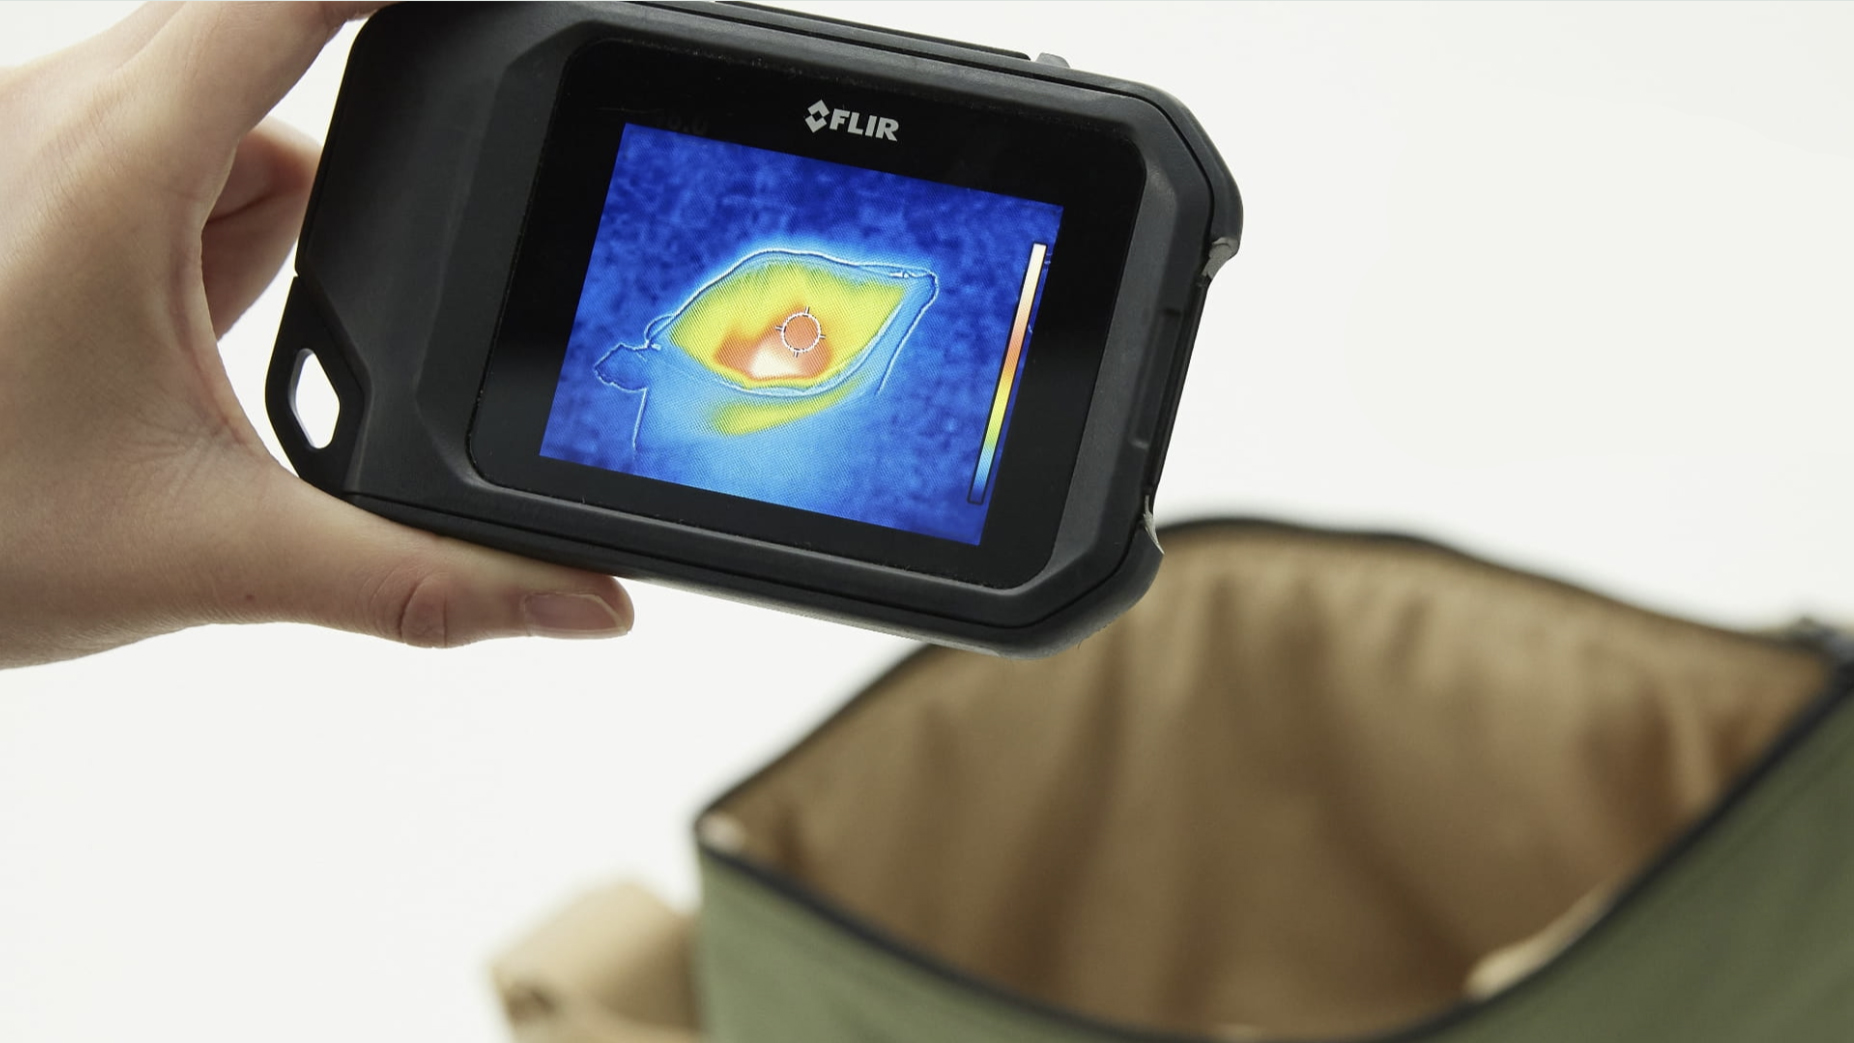 A handy holding an infrared thermometer in front a heatable bag